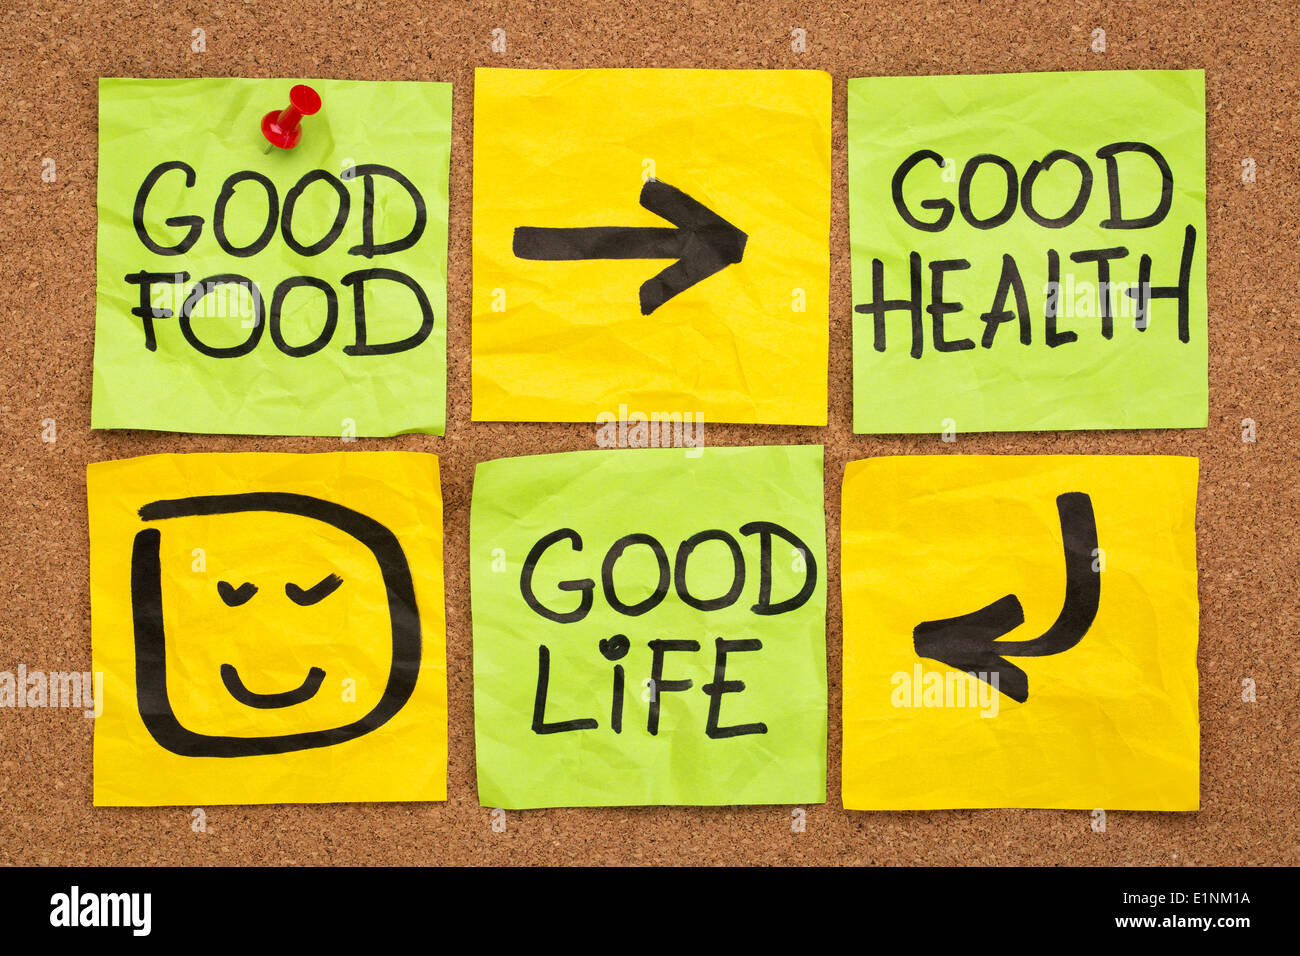 healthy lifestyle concept - good food, health and life - reminder words handwritten of sticky notes Stock Photo